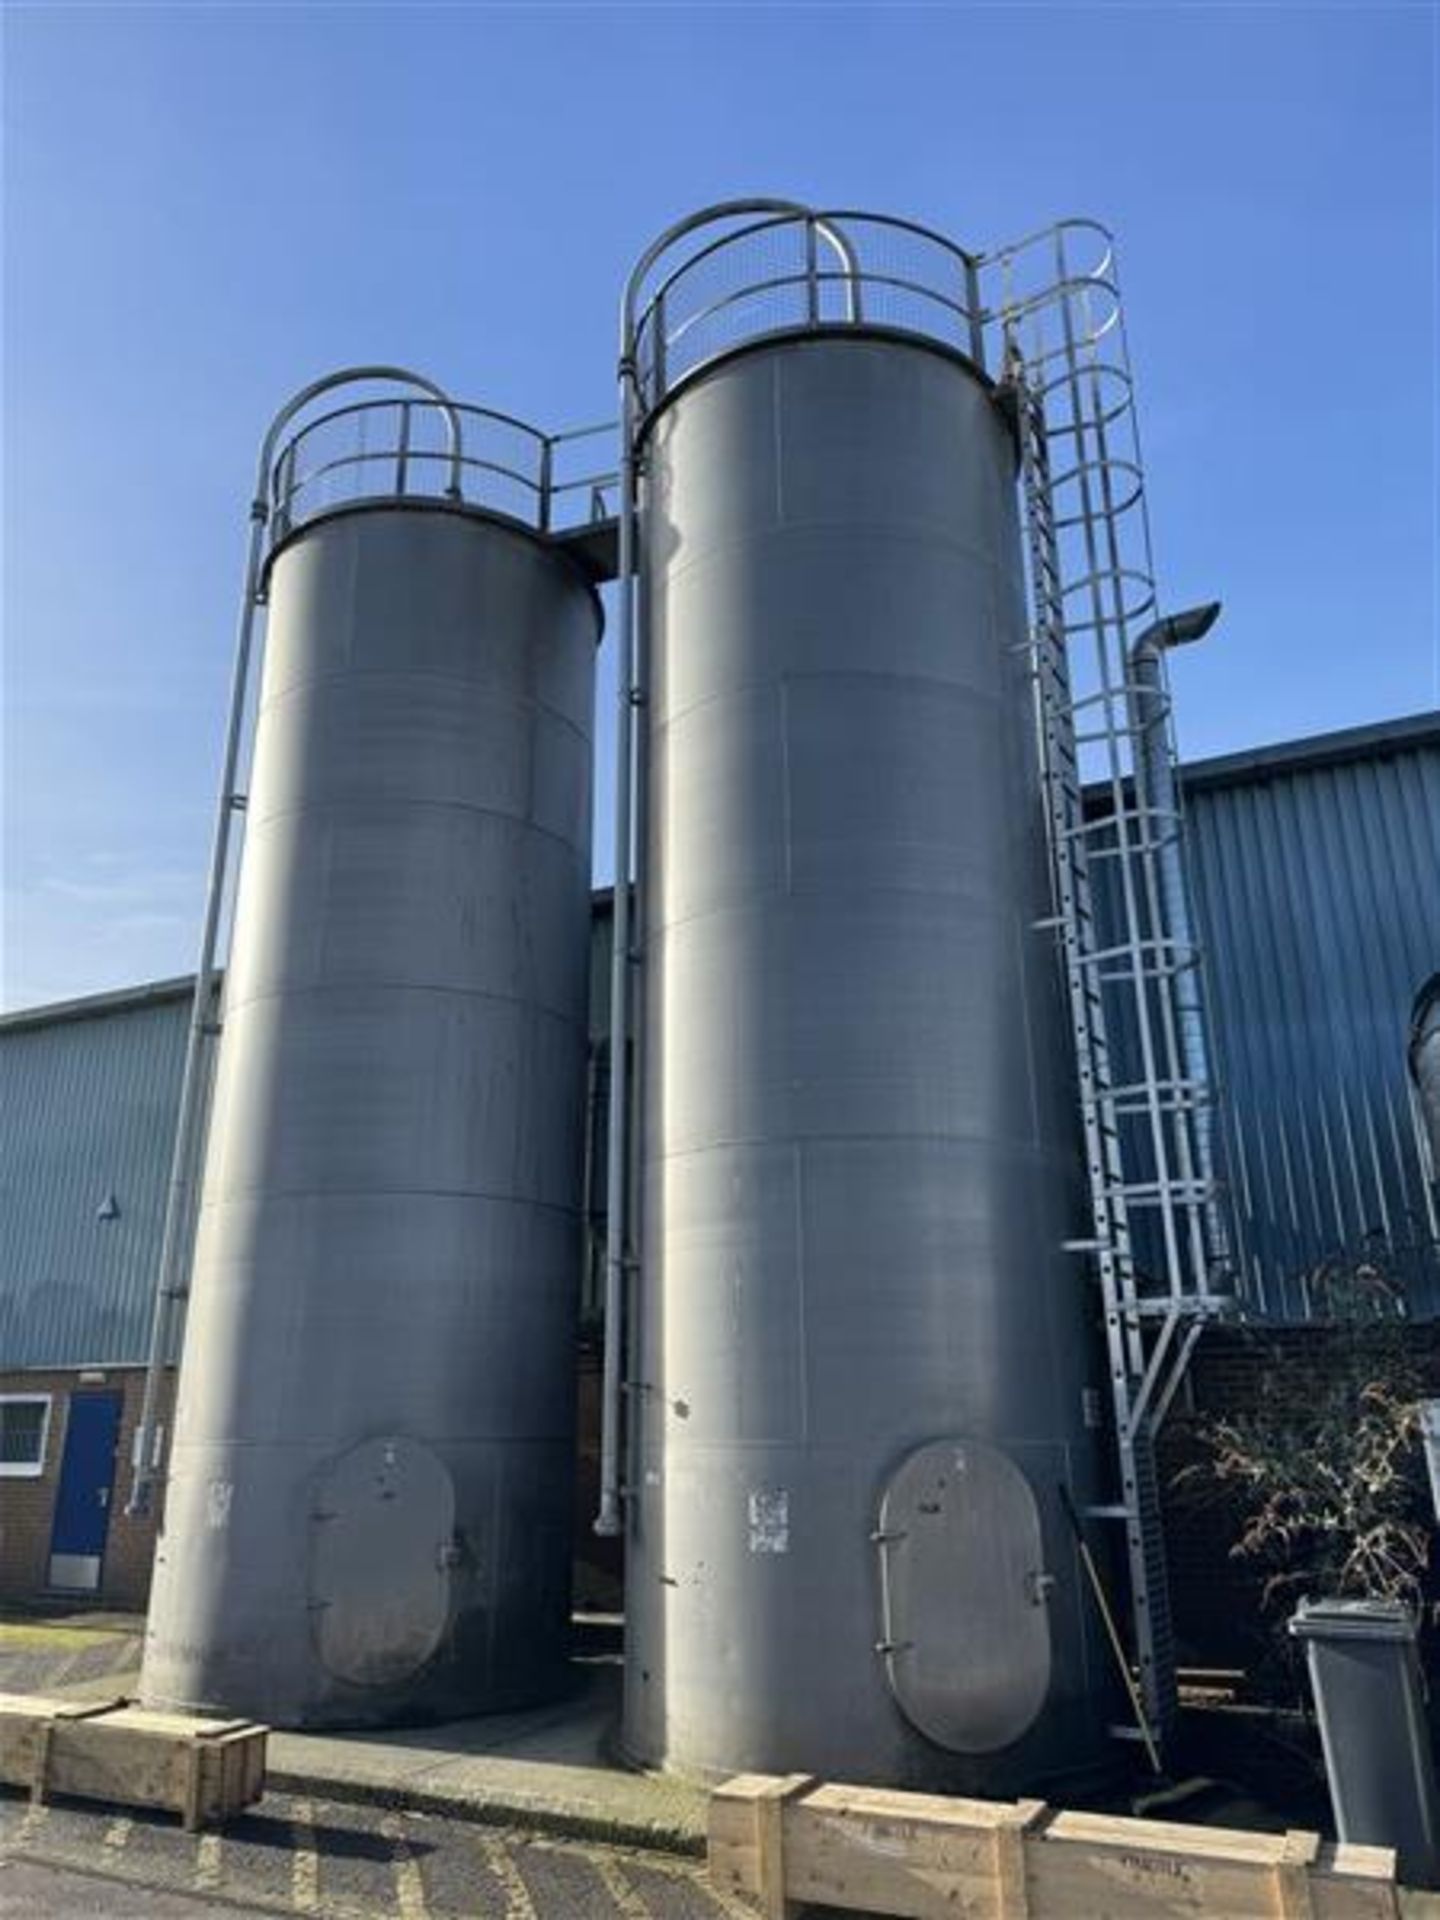 x2 Aluminium single skin 25 ton capacity vertical silos, with weigh scales and ICP A work Method - Image 3 of 7